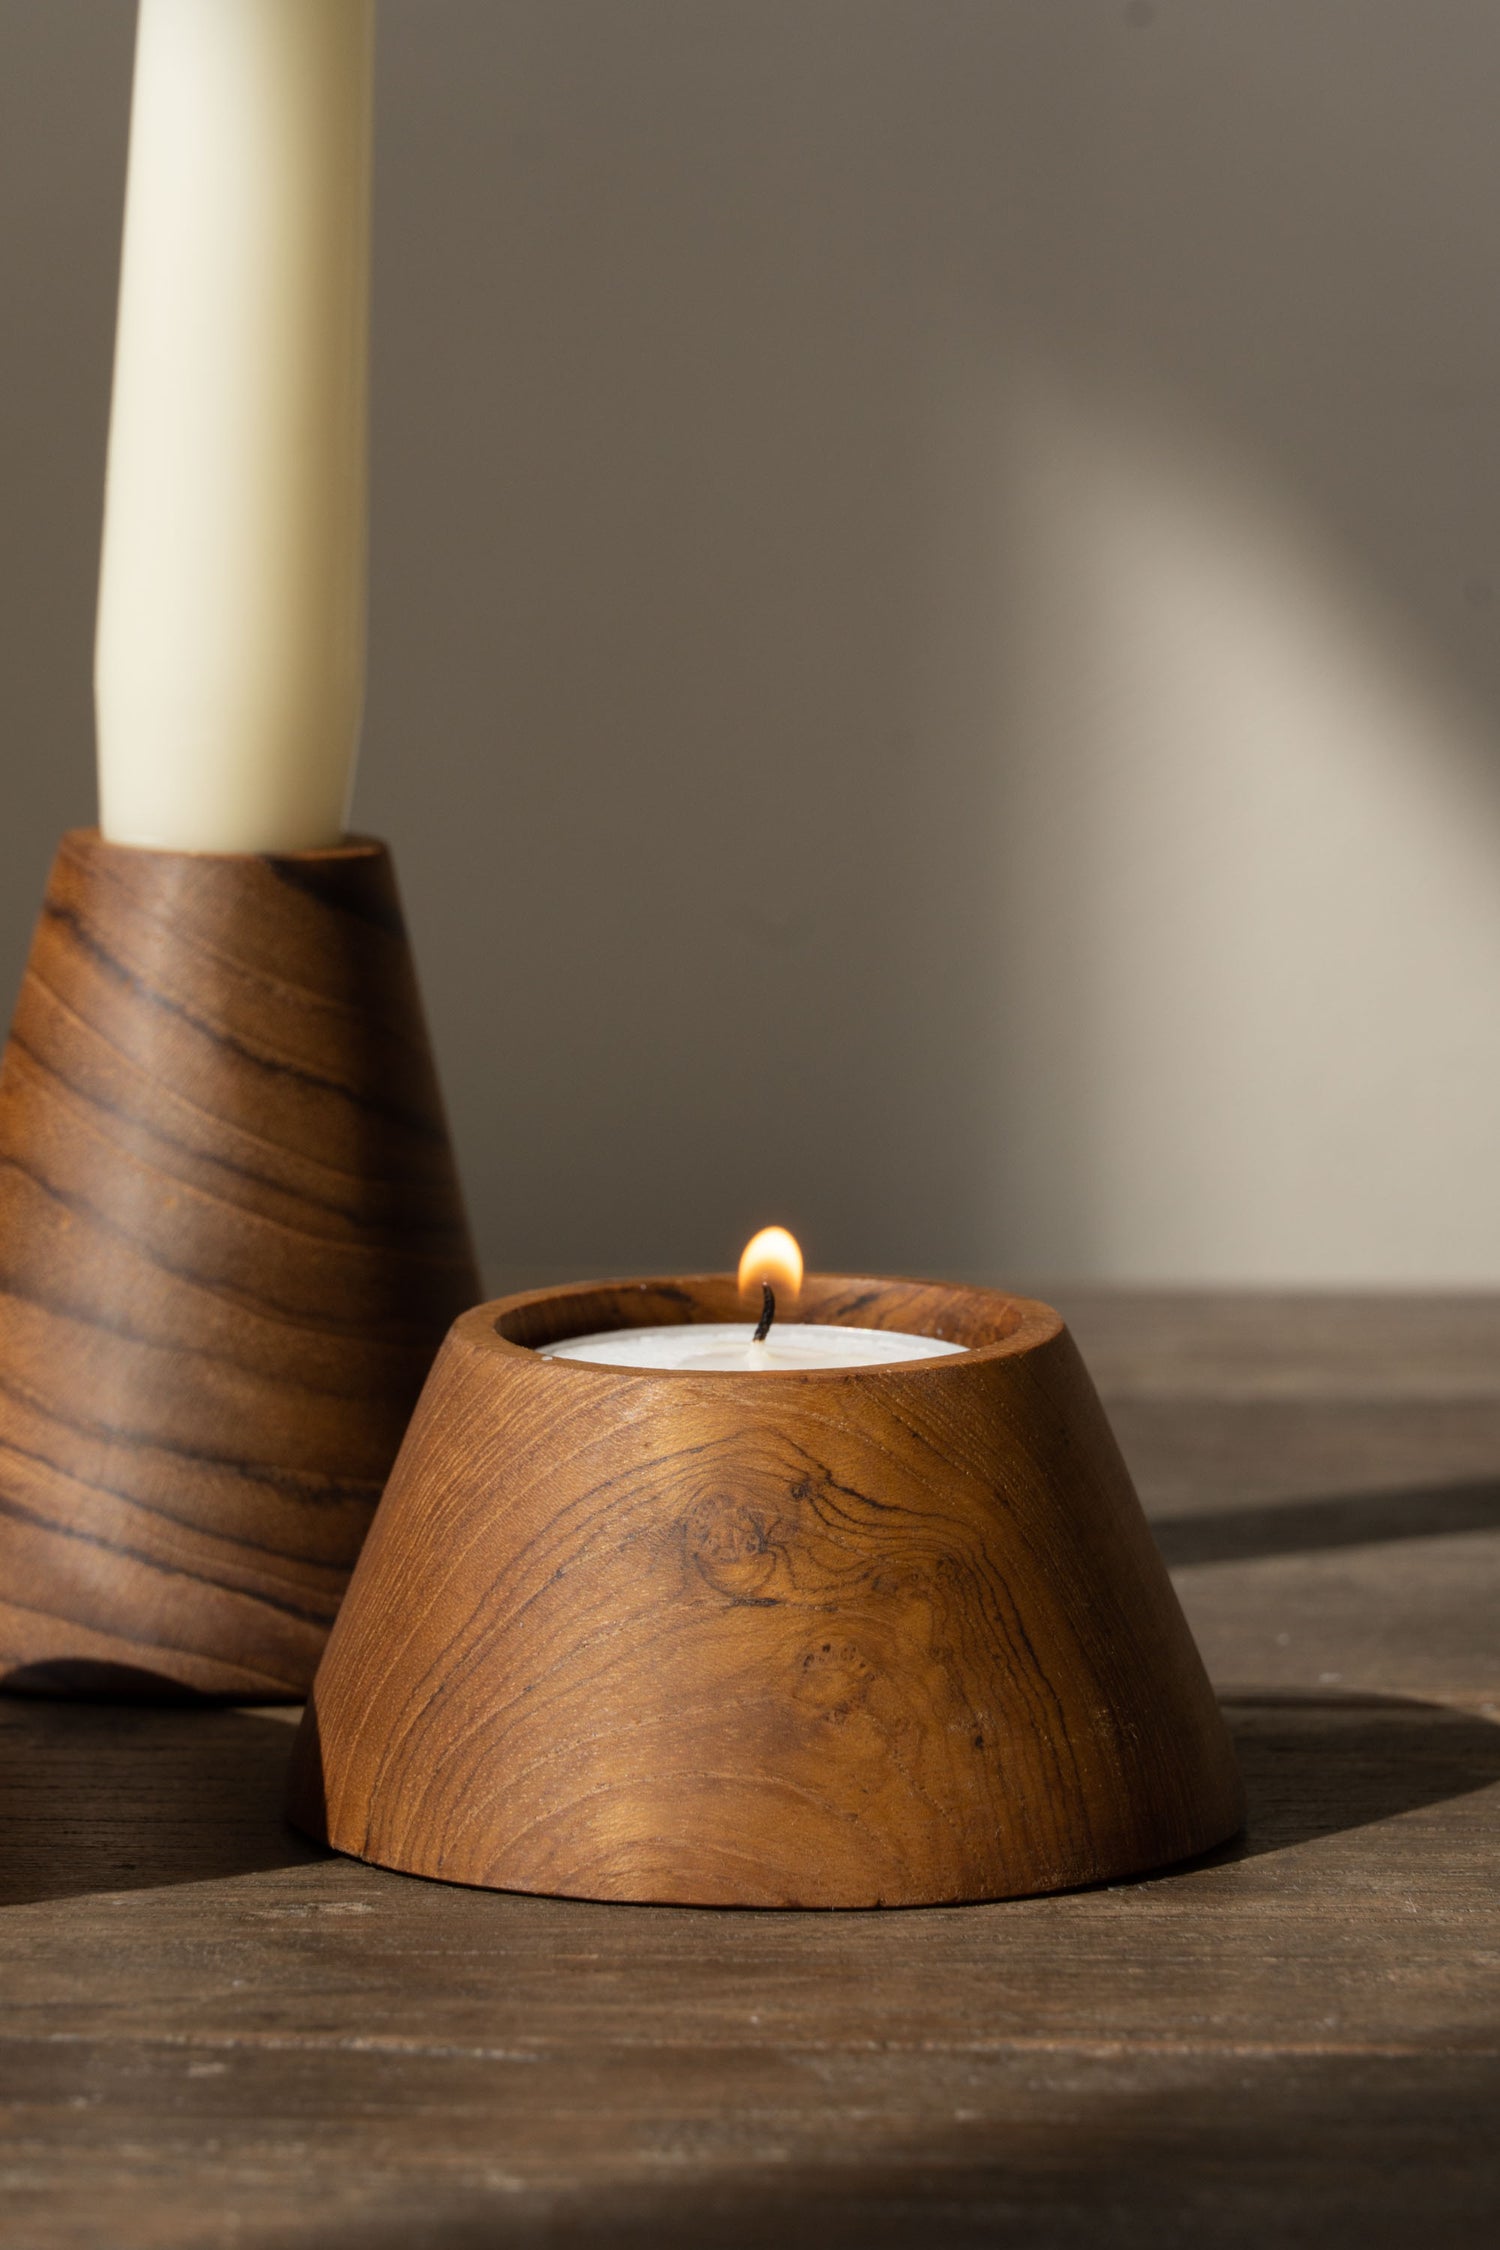 Cone of the Block Wooden Candleholders Set.